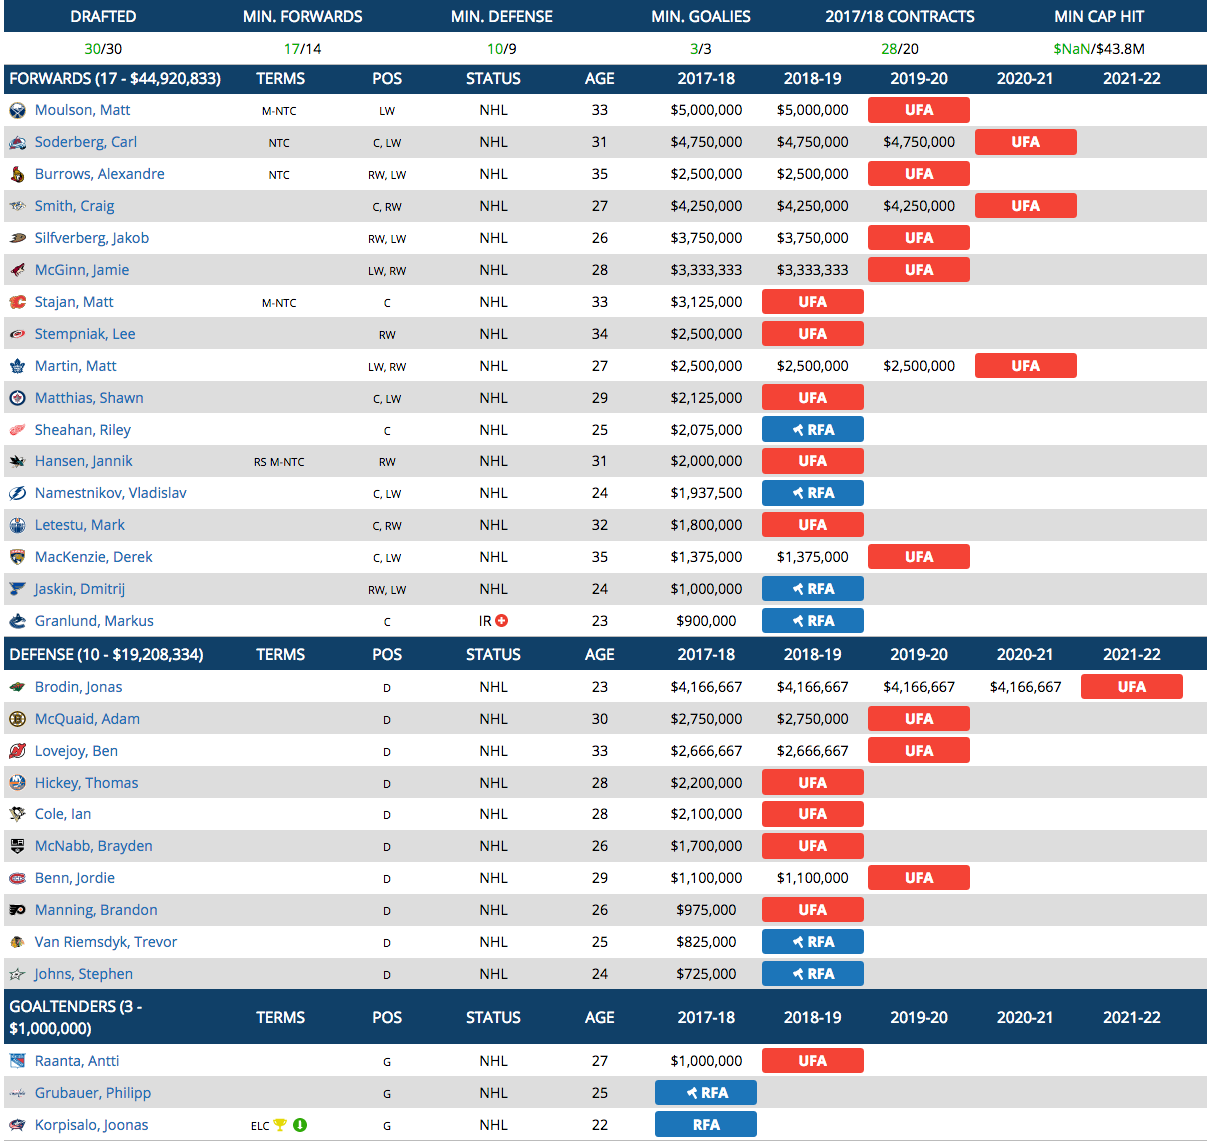 Mock NHL Expansion Draft: Who will the Golden Knights pick?Reset Password Email SentCreate New PasswordAlmost Done!My profileYour account has been created!Your account has been createdSign InSign InAlmost Done!Sign in to complete account mergeYour Verification Email Has Been SentReset Password Email SentCreate a new passwordPassword ChangedChange passwordYou did it!Resend Email VerificationSo sorry to see you go!Unsubscribe failed